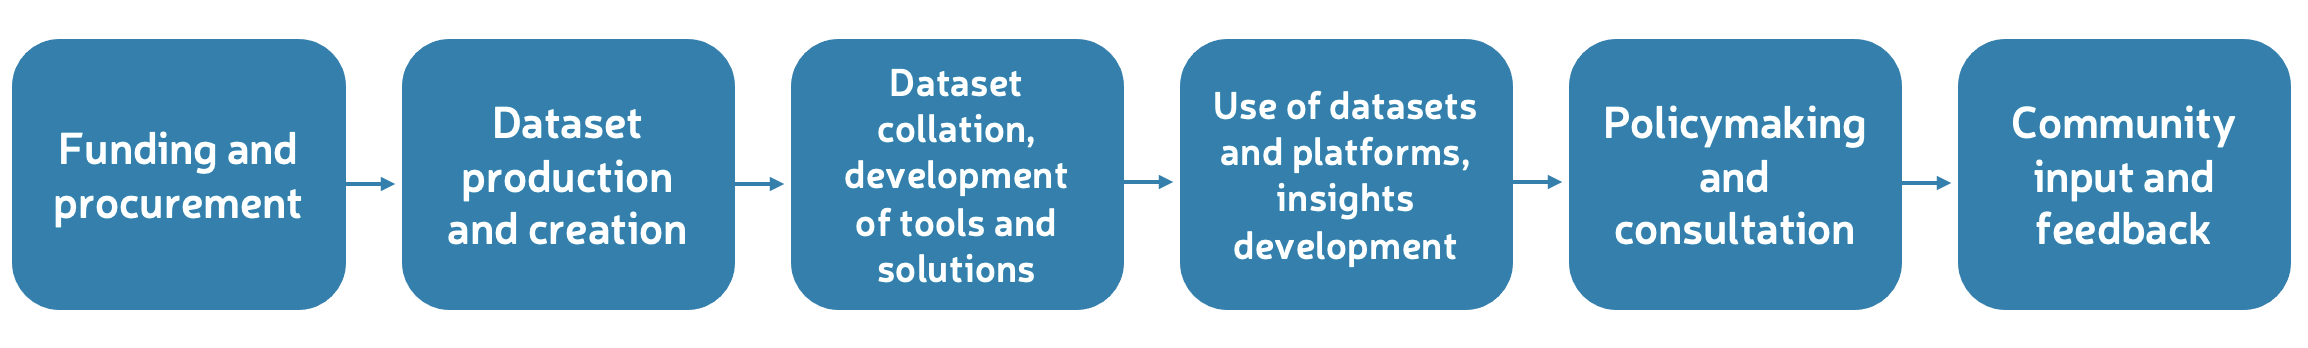 A flow chart with arrows pointing from: funding and procurement; dataset production and creation; dataset collation, development of tools and solutions; use of datasets and platforms, insights development; policymaking and consultation; community input and feedback